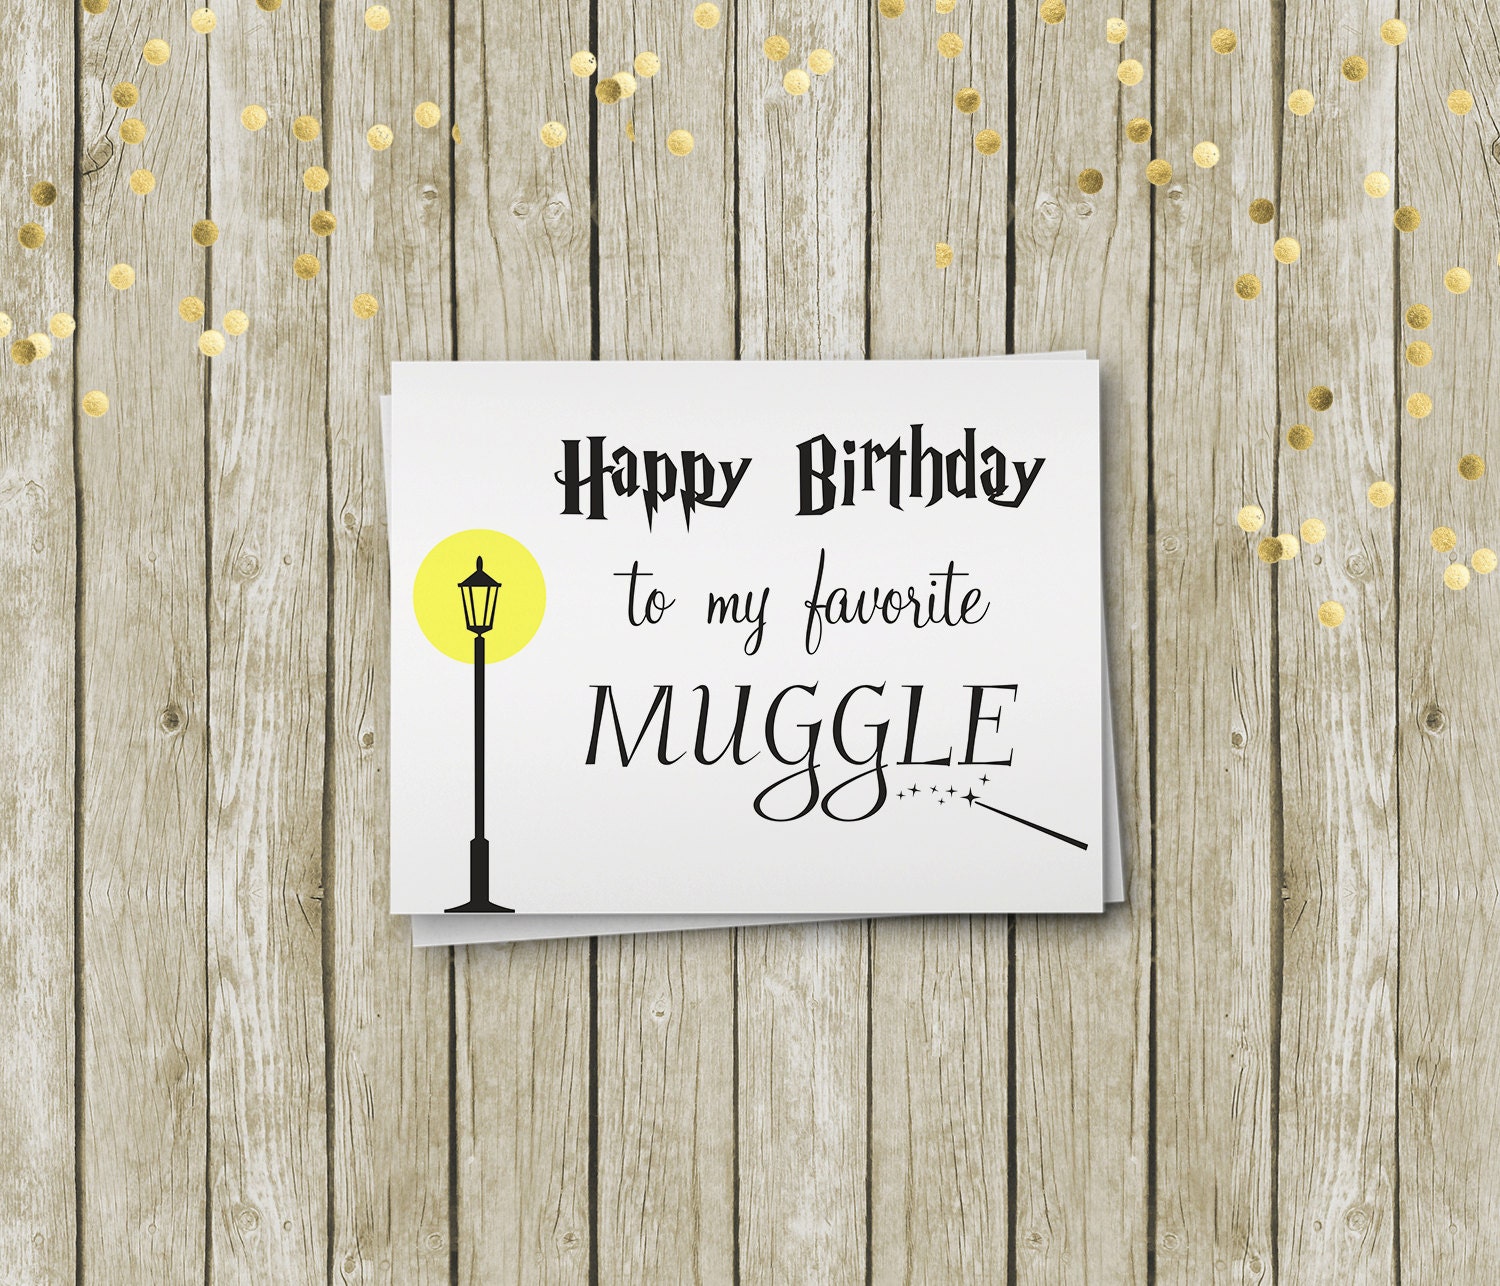 Harry Potter Birthday Card Printable Birthday Card by PrintyMuch